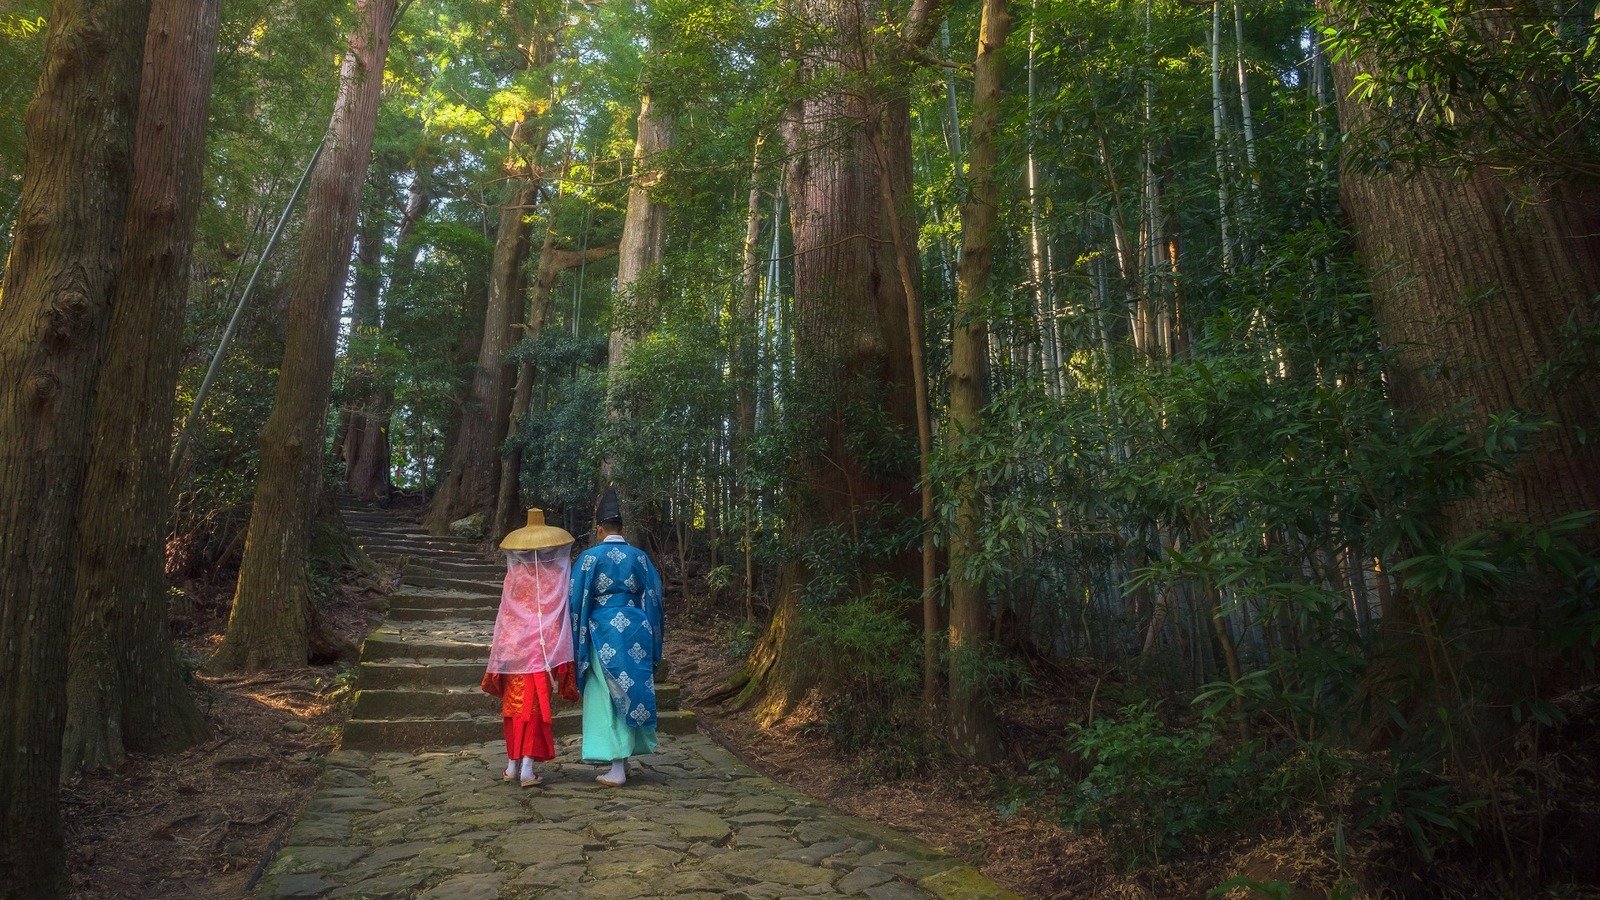 Hike Along This Ancient Trail And Take In Stunning Japanese Forest Views